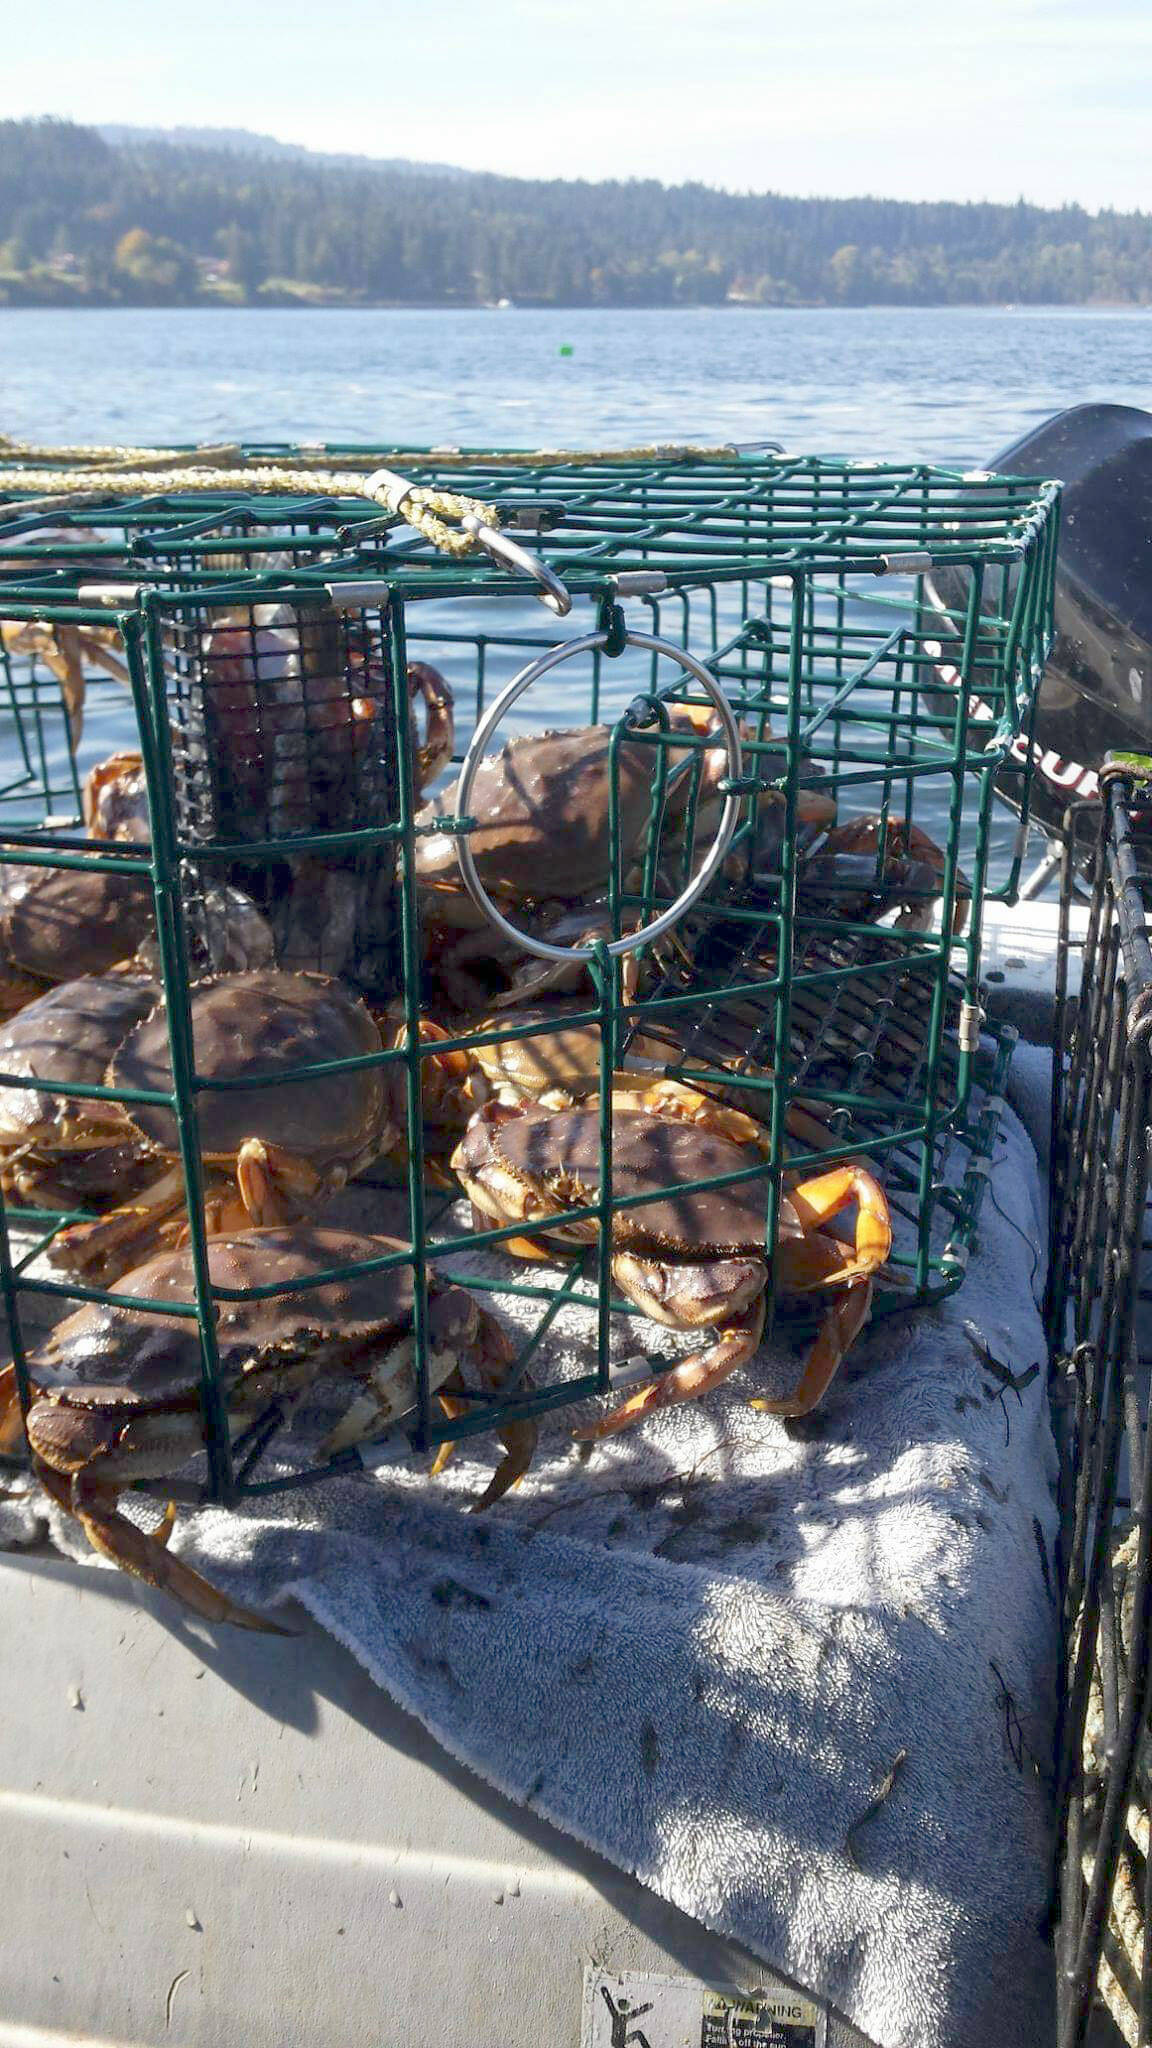 Puget Sound Anglers-North Olympic Peninsula chapter A full Dungeness crab pot awaits crabbers during a run to check pots on the Strait of Juan de Fuca last summer.